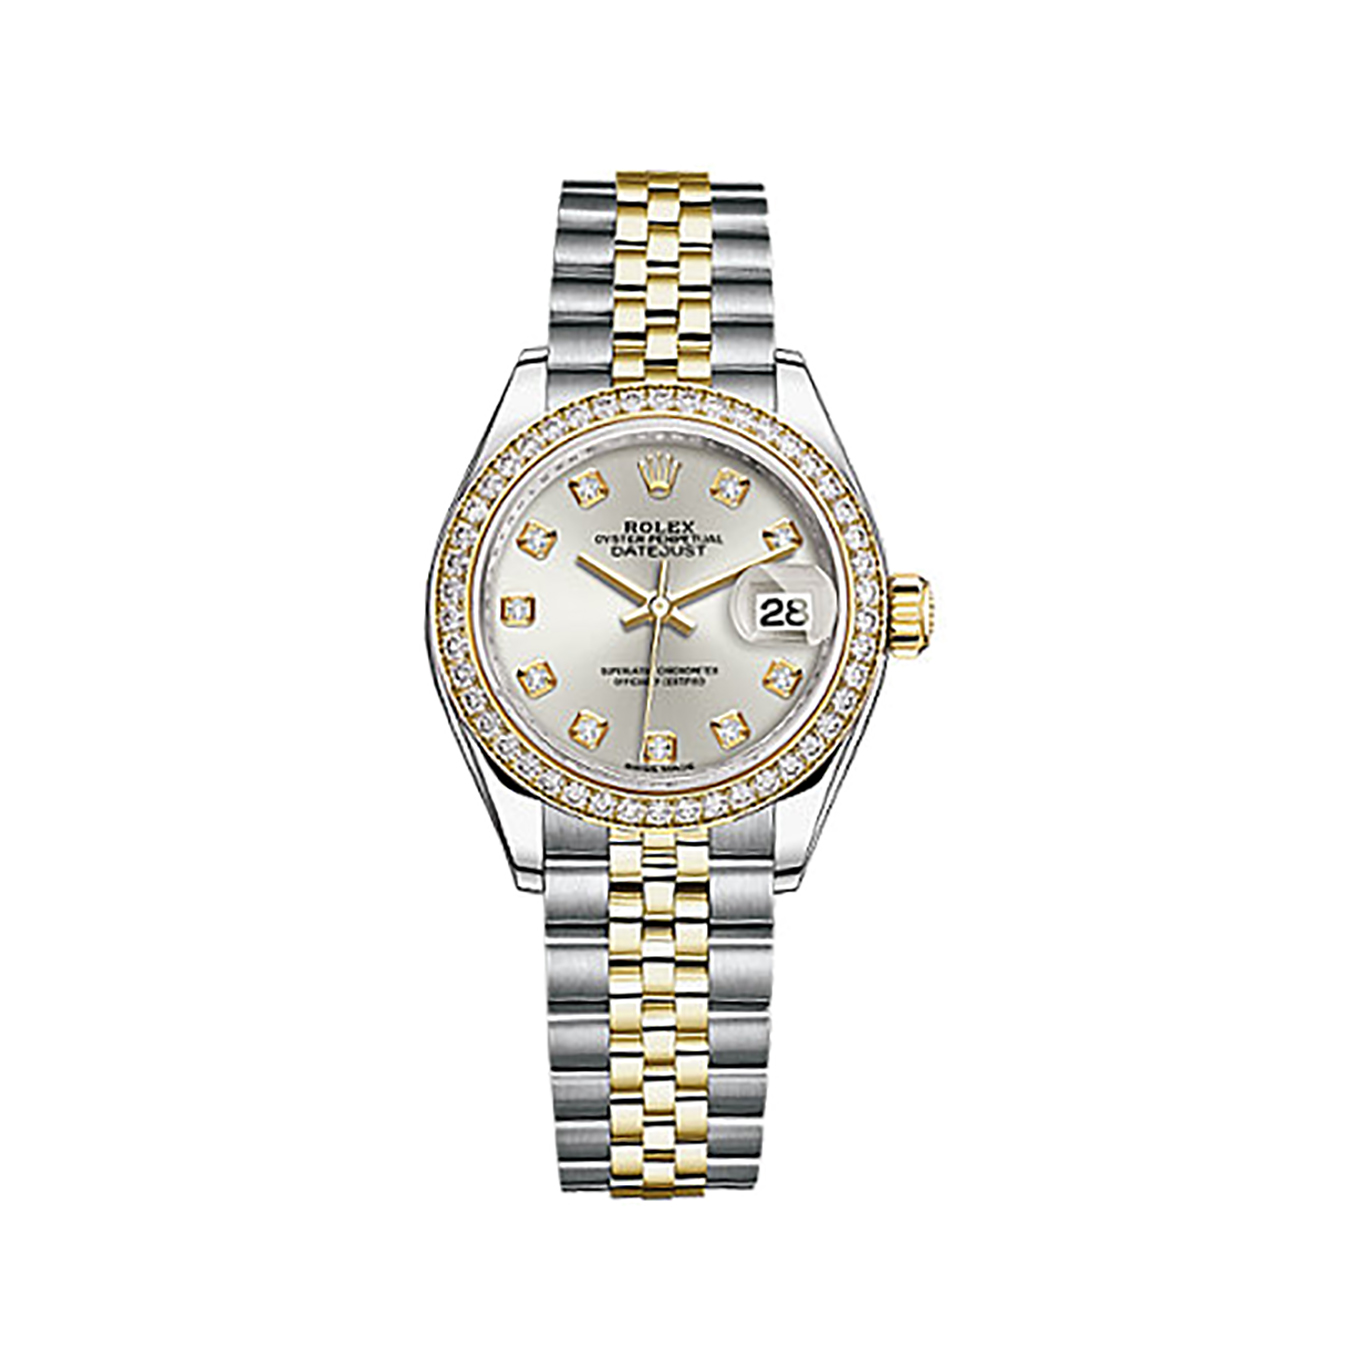 Lady-Datejust 28 279383RBR Gold & Stainless Steel & Diamonds Watch (Silver Set with Diamonds) - Click Image to Close